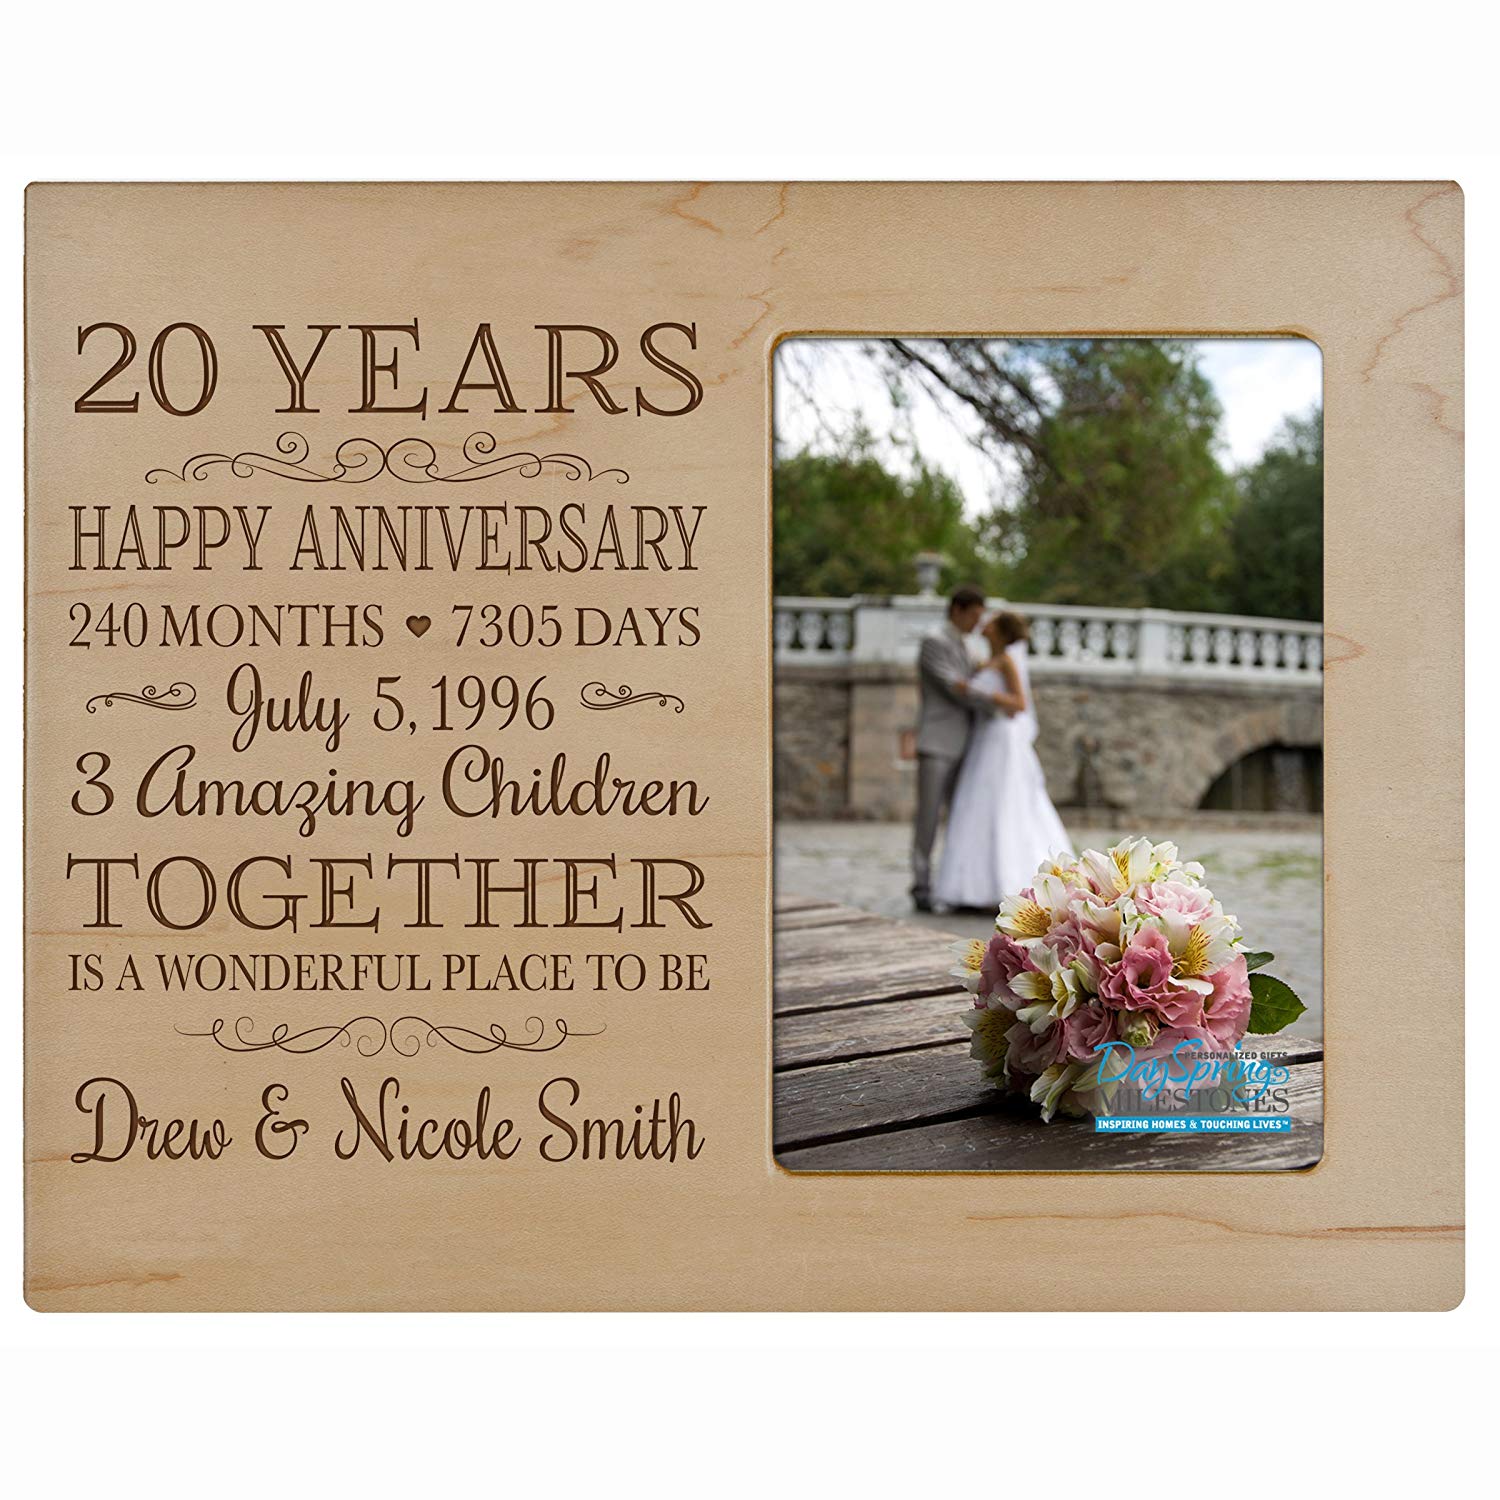 Lifesong Milestones Personalized Unique 20th Wedding Anniversary Picture Frame for Couples